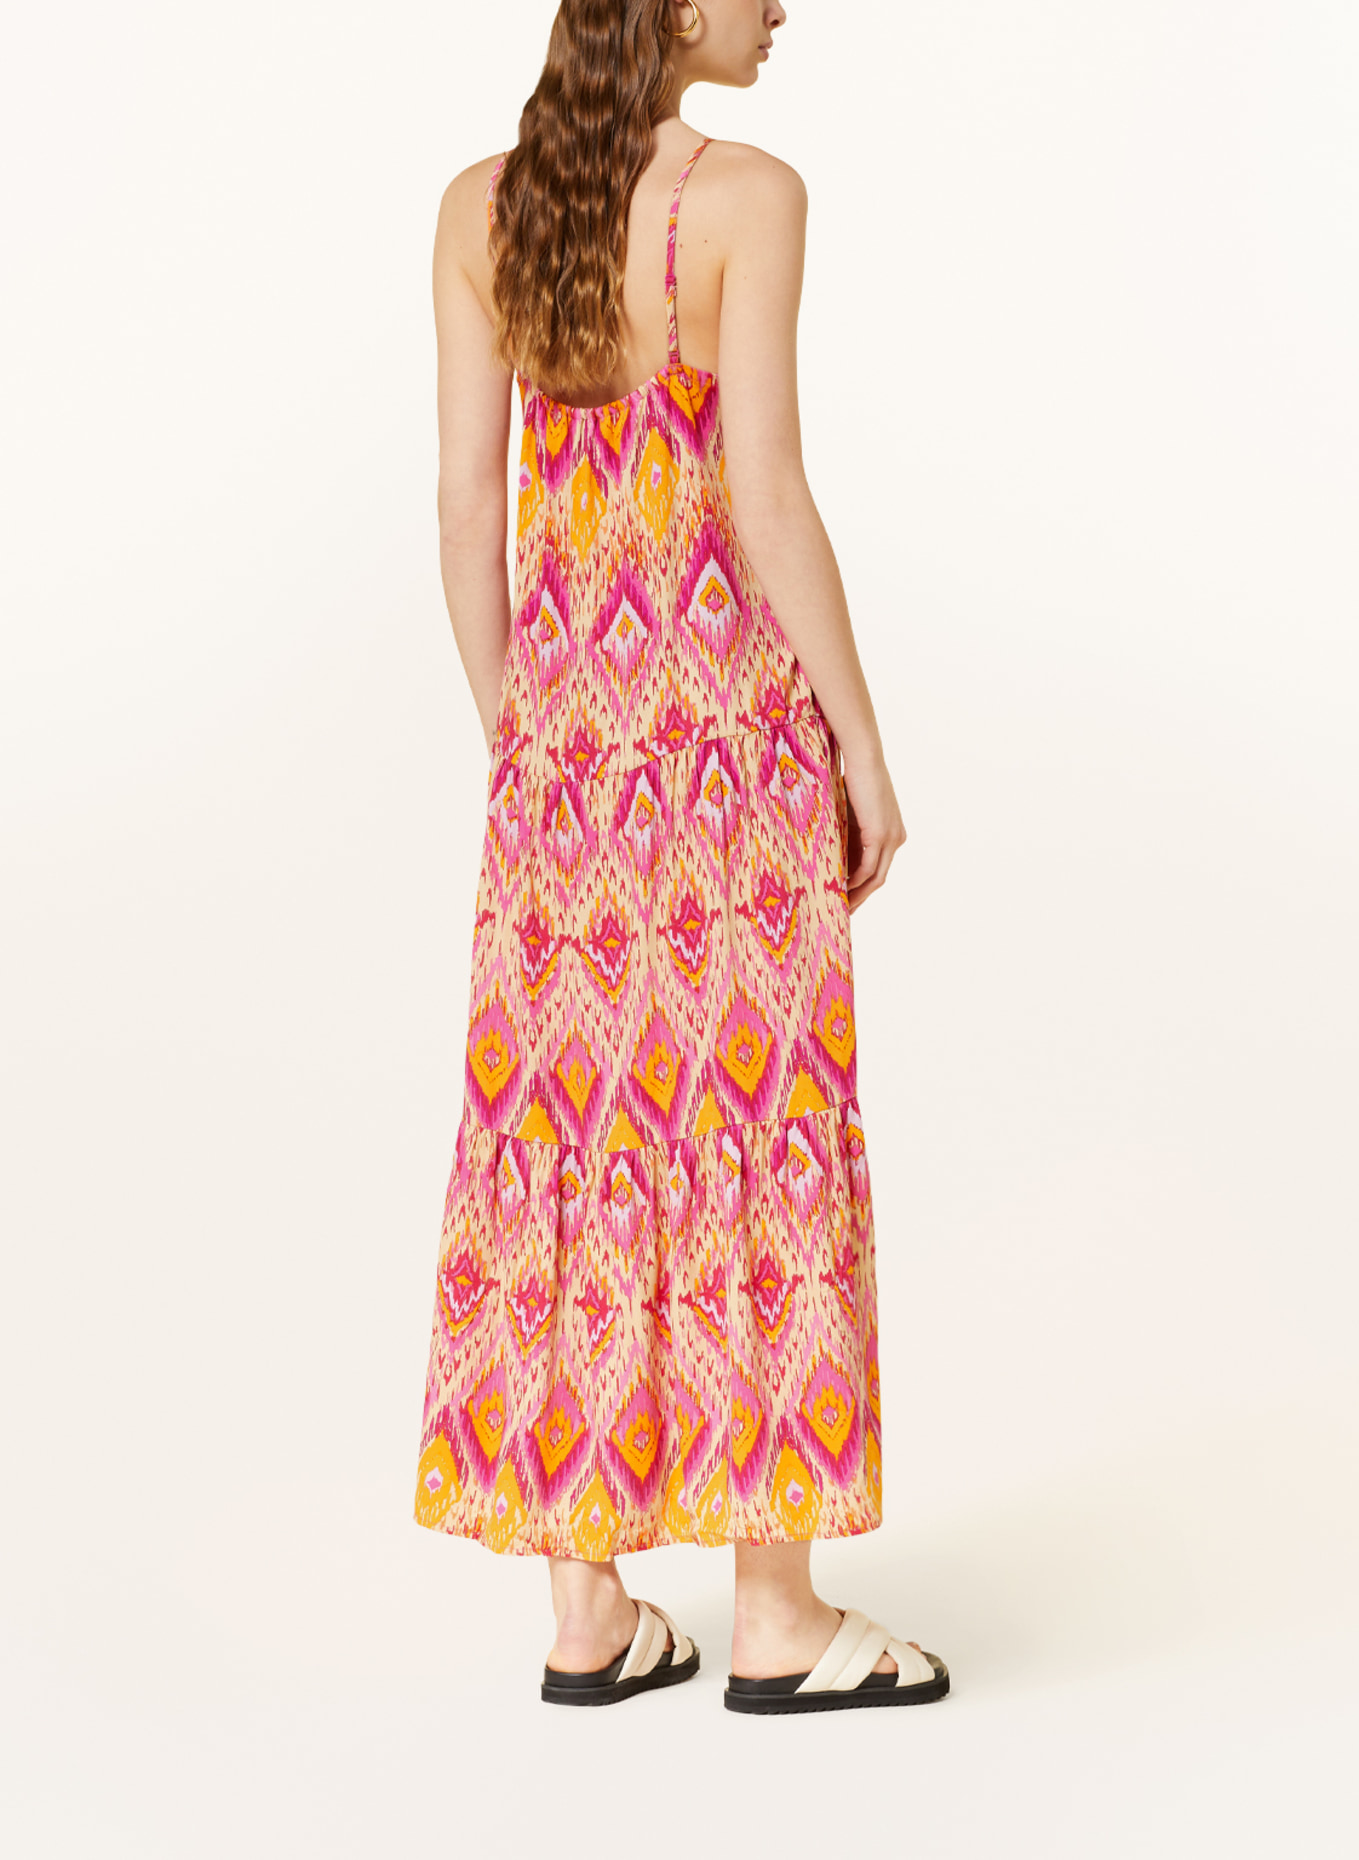 ONLY Dress, Color: ORANGE/ PINK/ LIGHT YELLOW (Image 3)